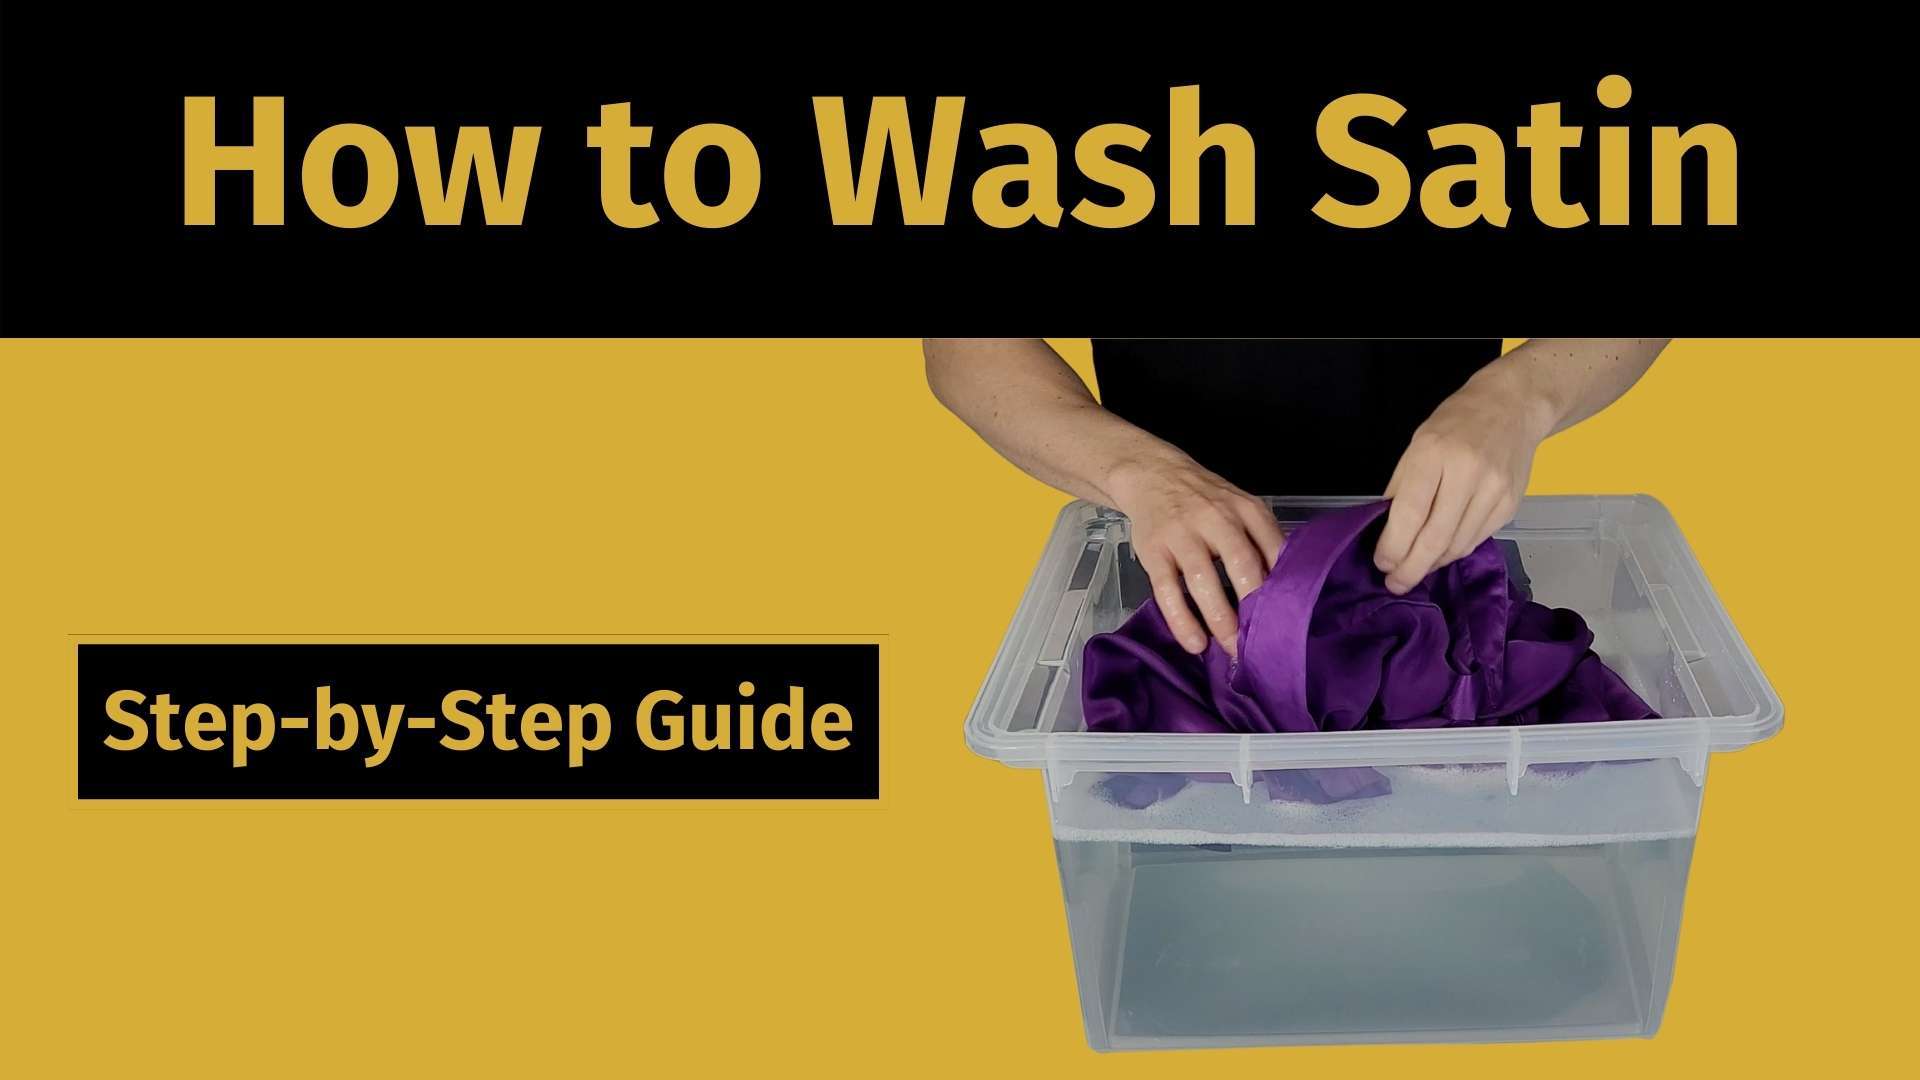 how to wash satin banner image with a picture of a man washing satin clothes in a bucket of water